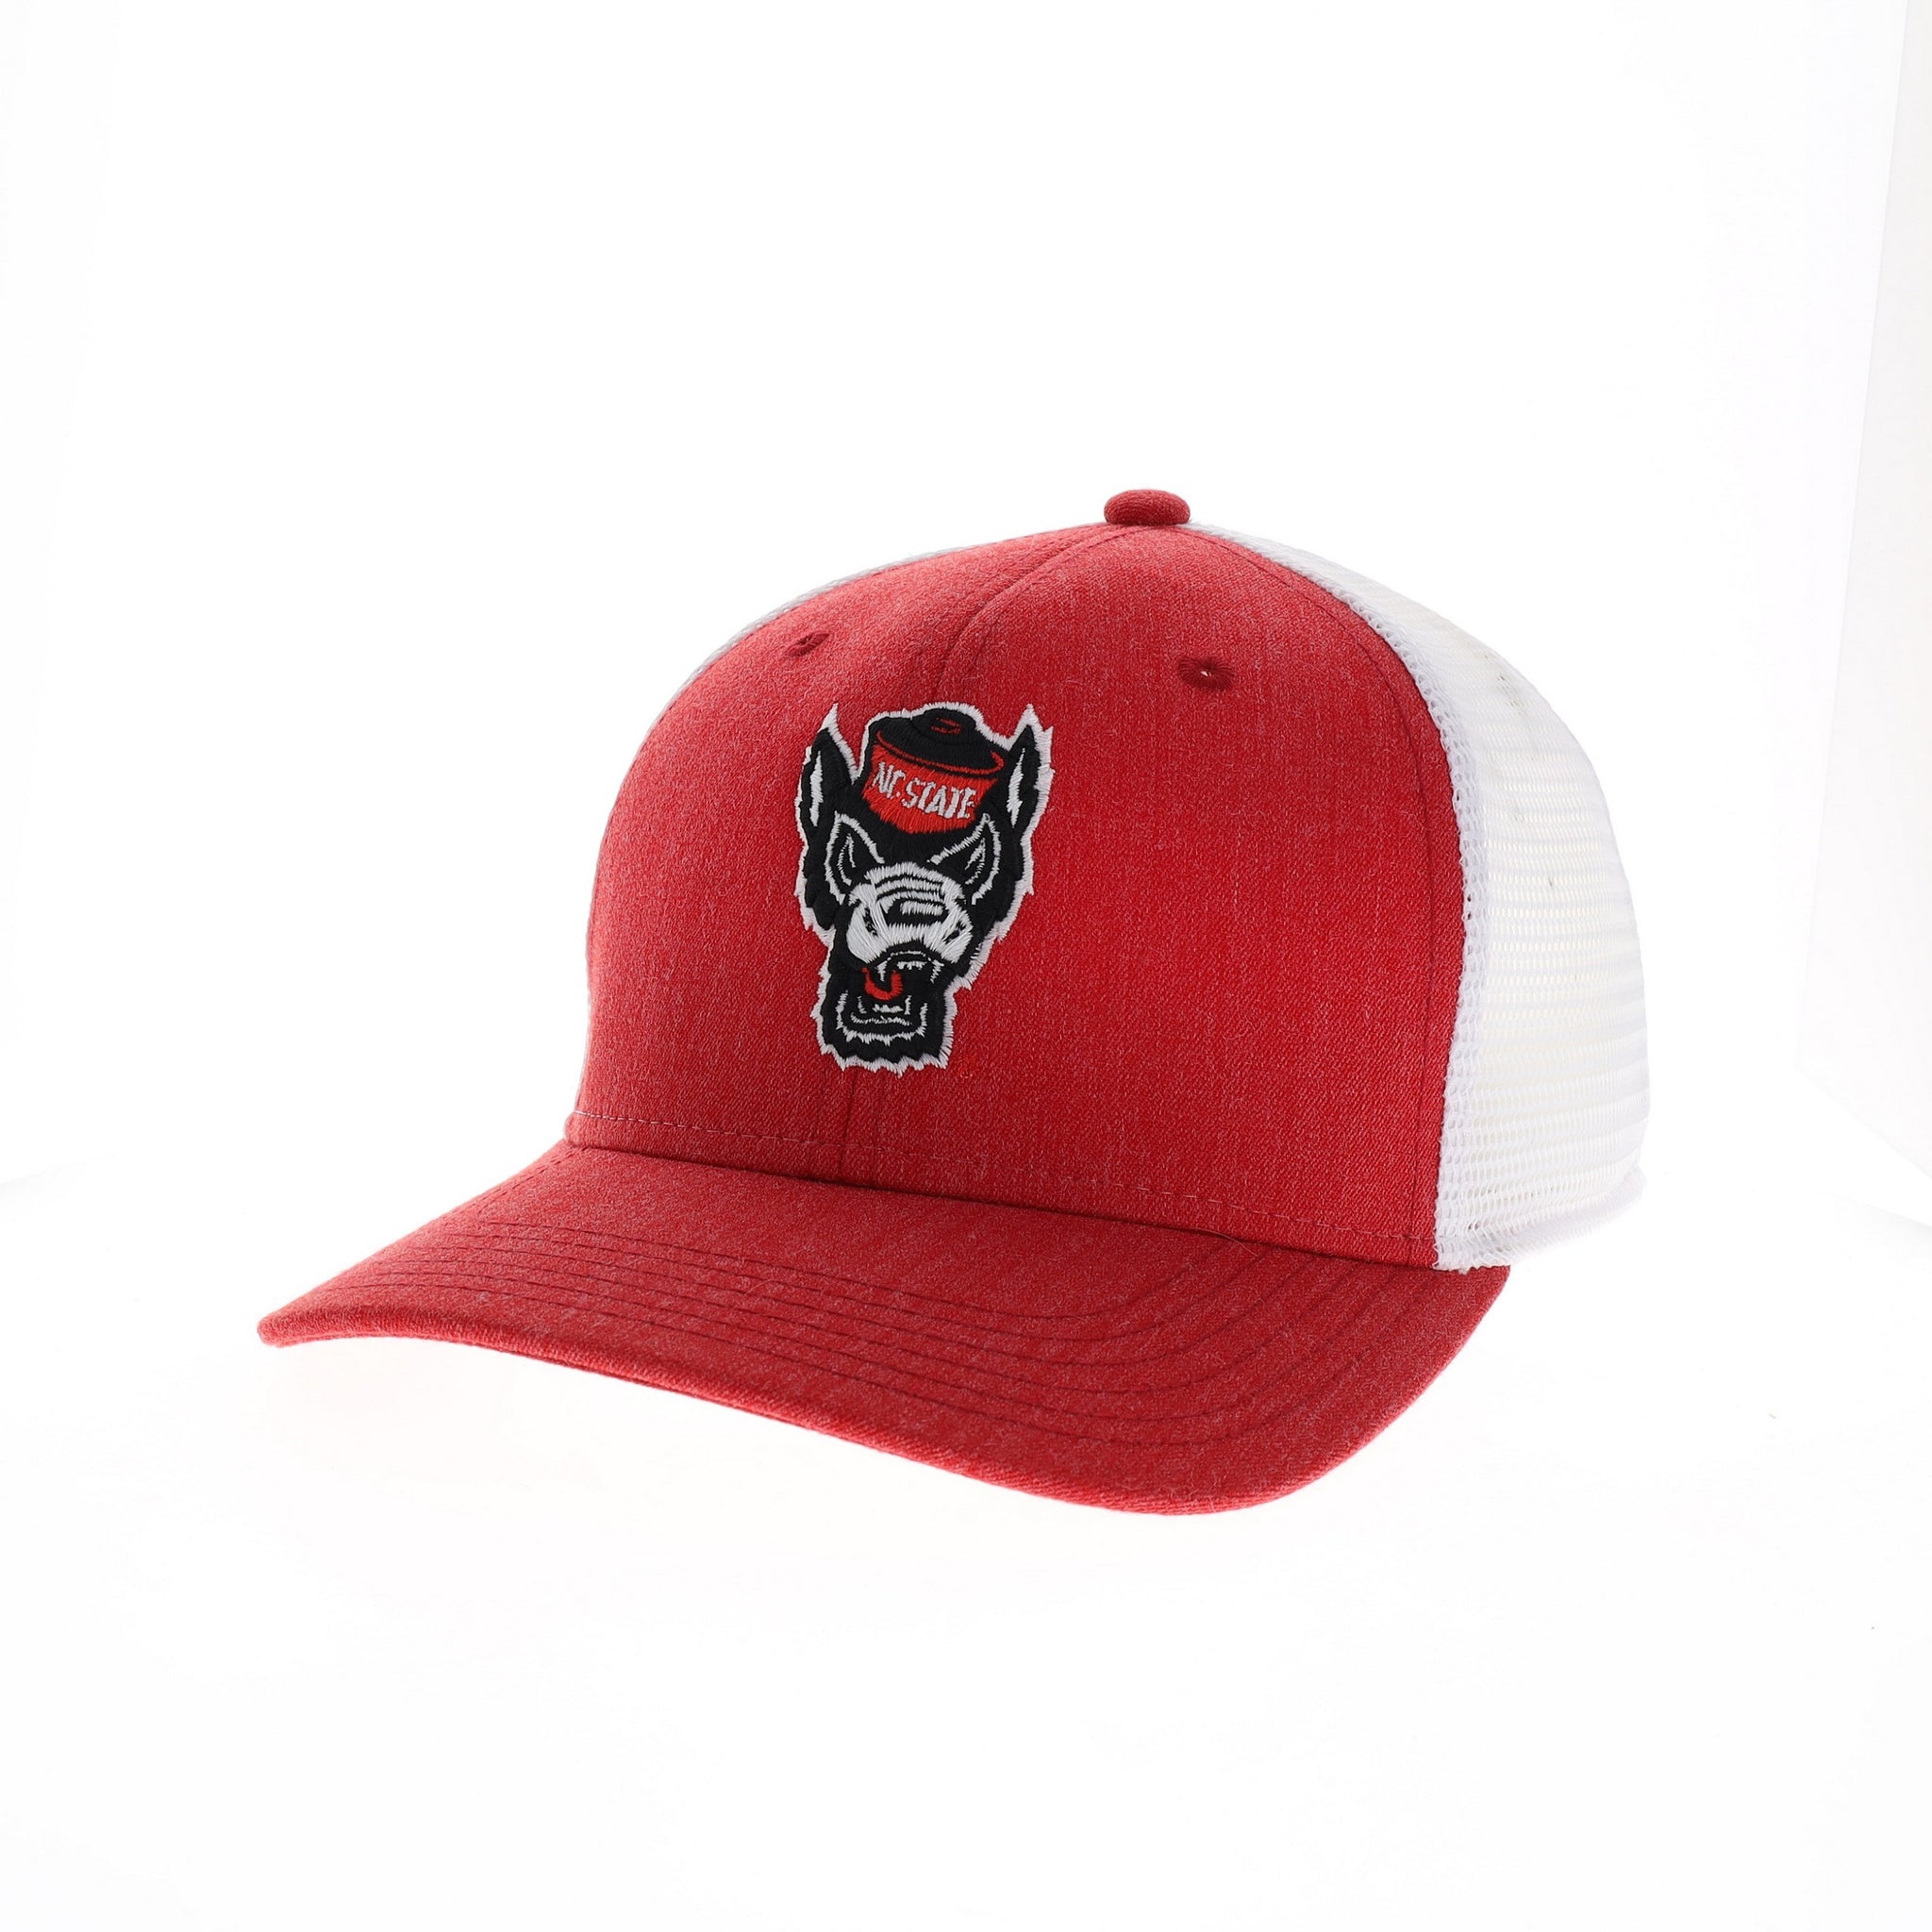 NC State Wolfpack Melange Red and White Wolfhead Mid Pro Snapback Adjustable Hat